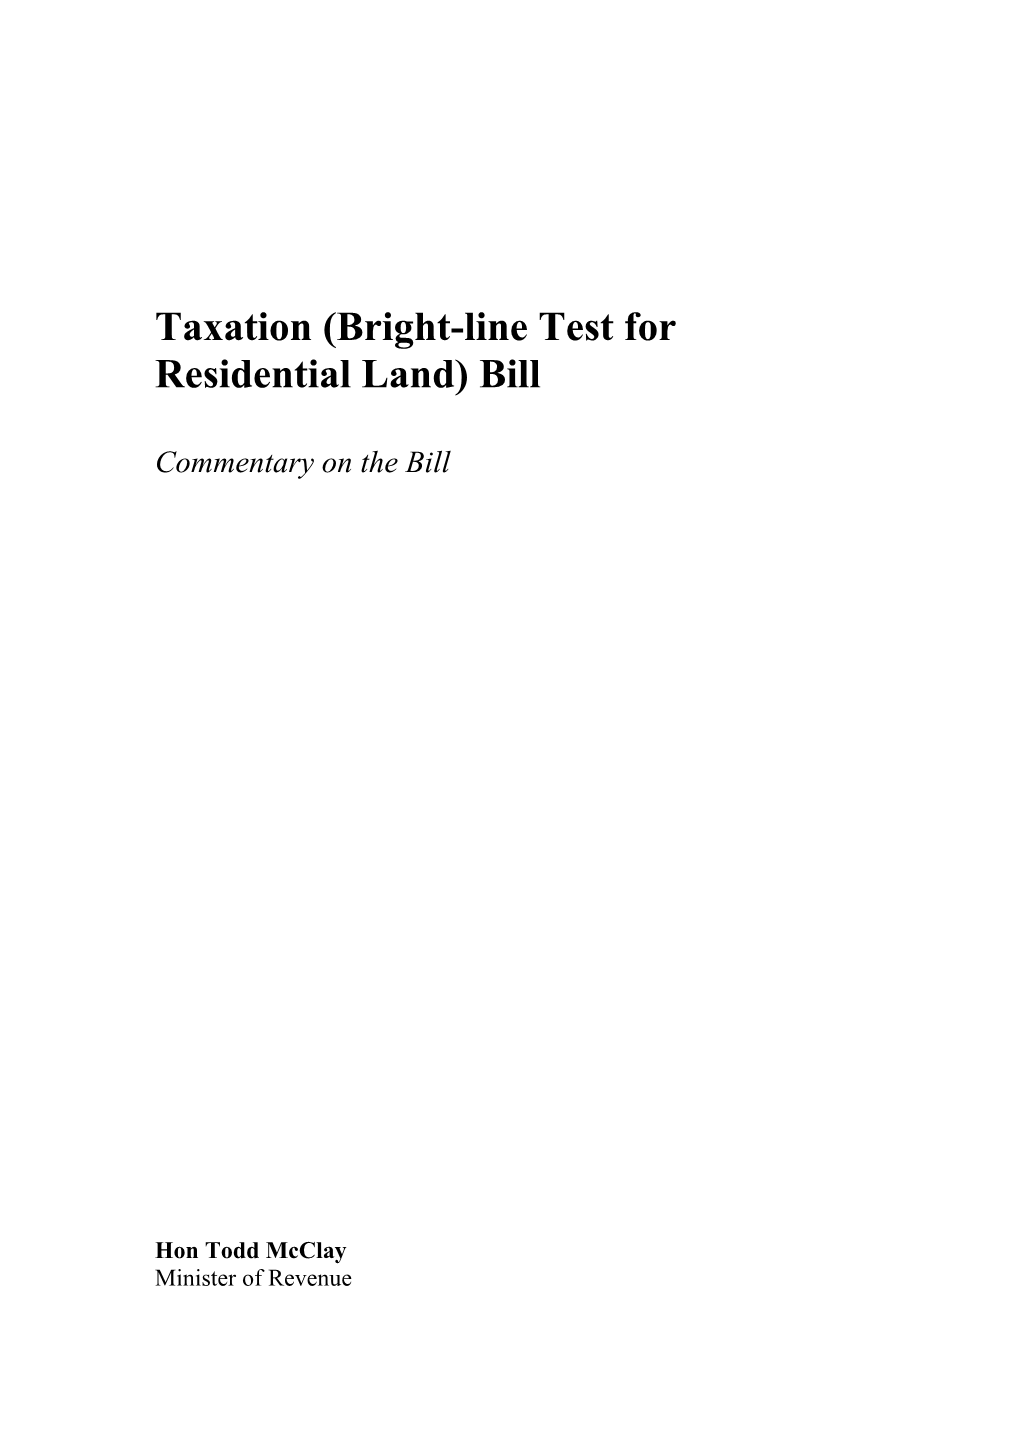 Taxation (Bright-Line Test for Residential Land) Bill - Commentary on the Bill